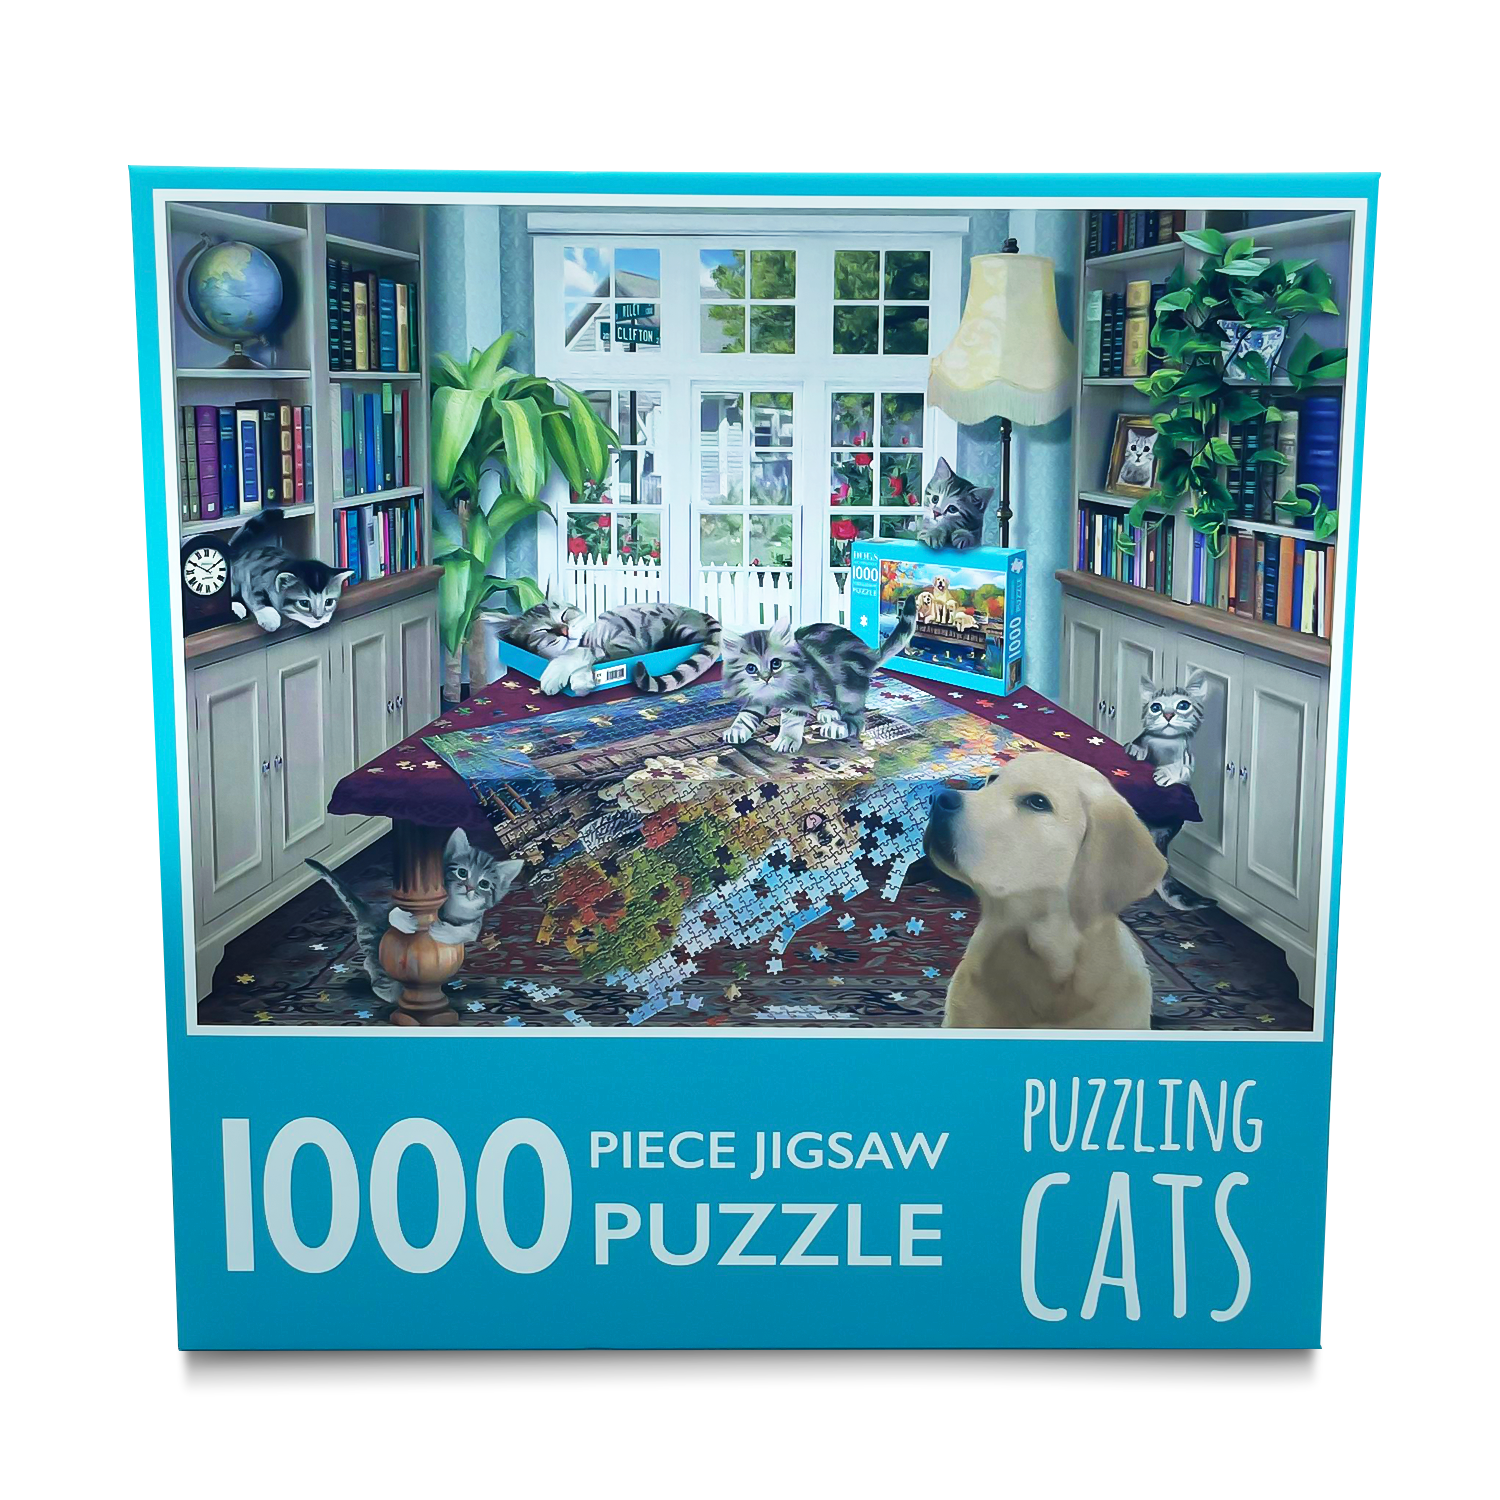 Cats Dressing Table 1000 Piece Jigsaw Puzzle